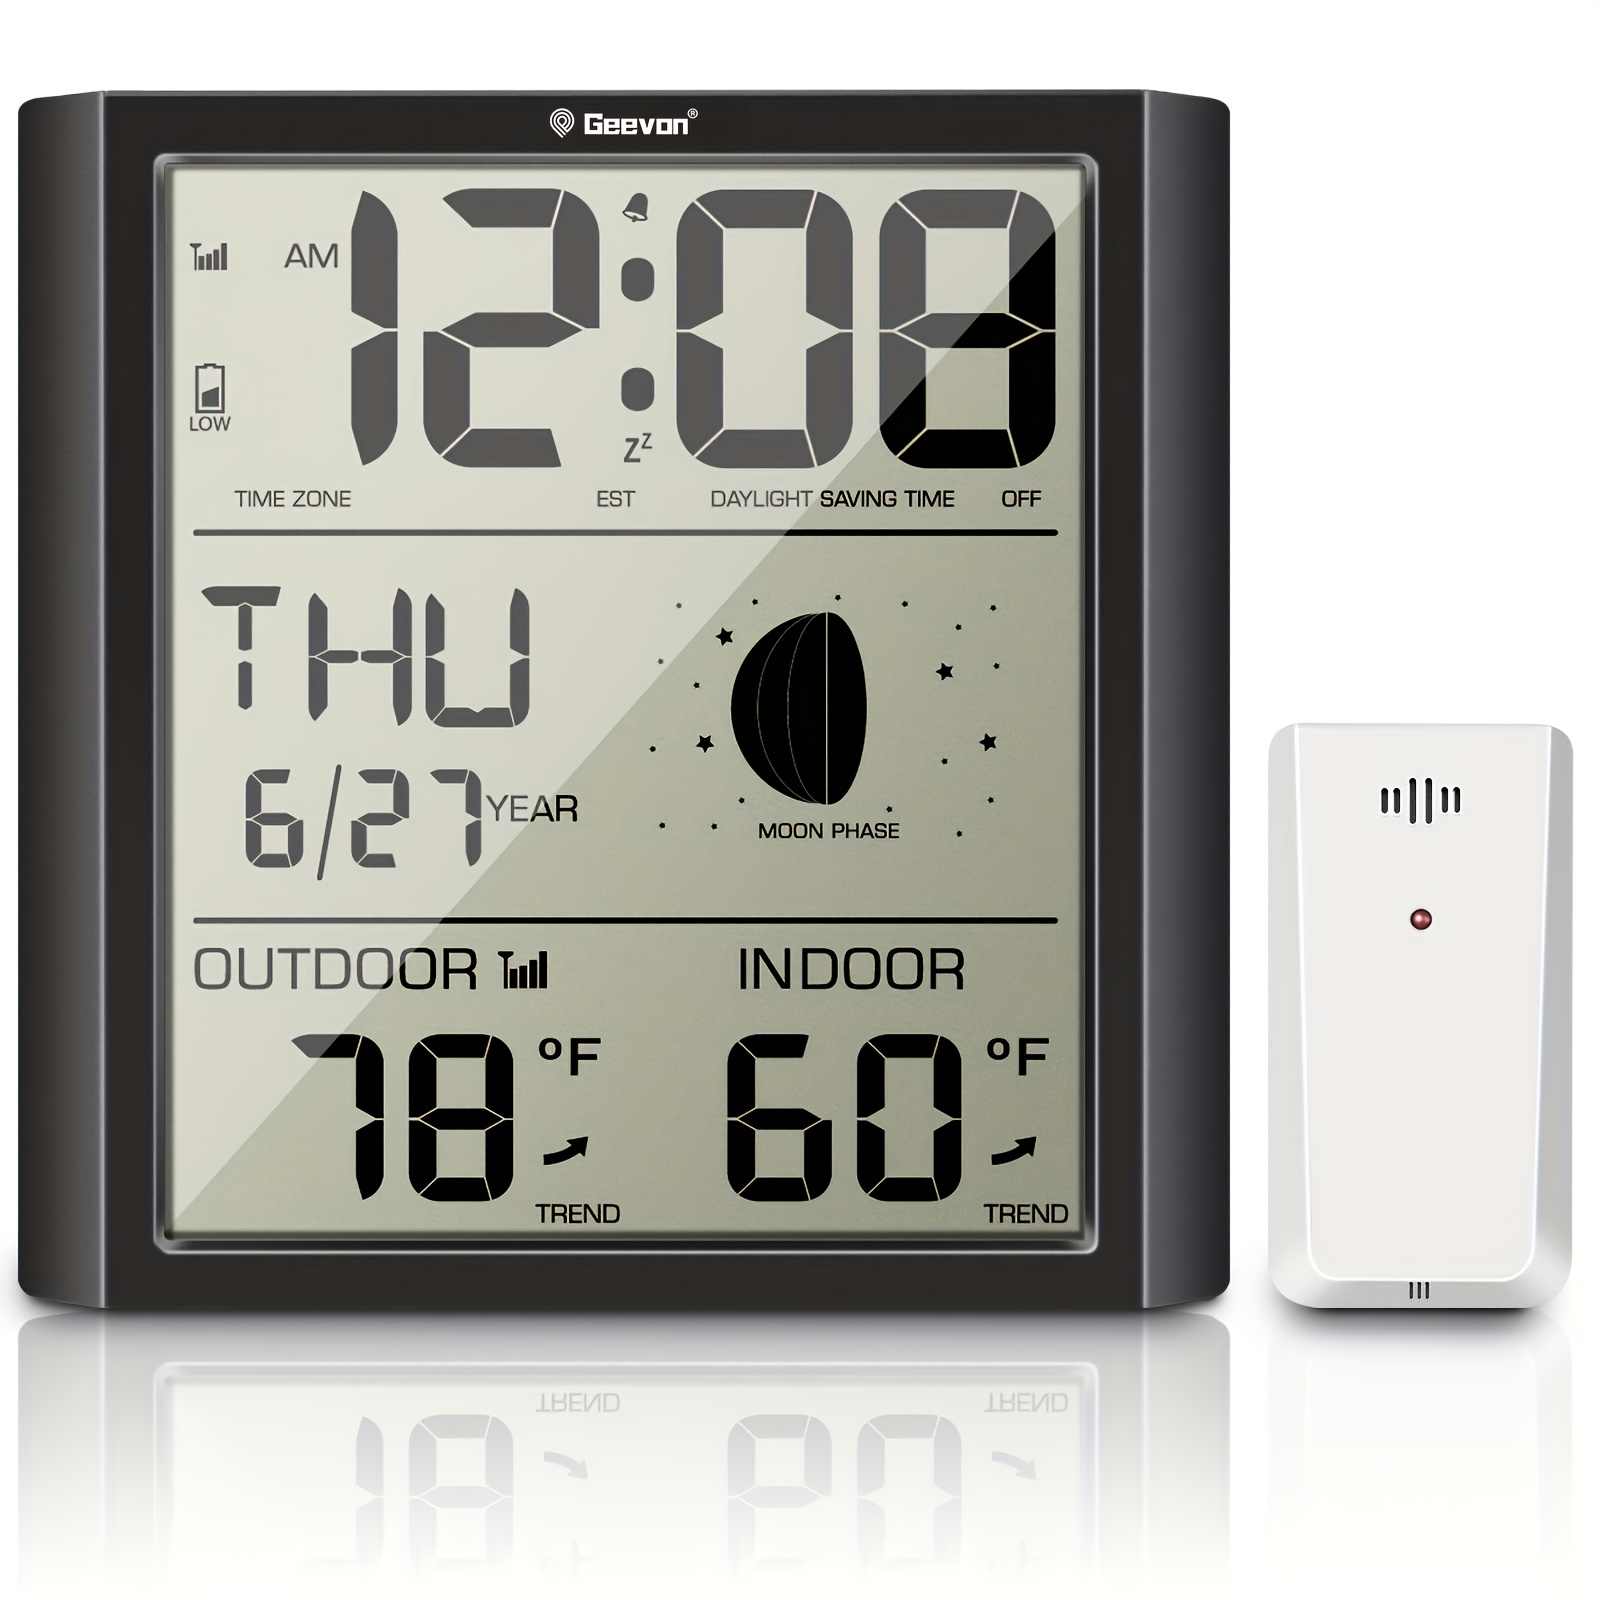 GEEVON 228646 Geevon Indoor Outdoor Thermometer Wireless with 3 Remote  Sensors, Digital Hygrometer Indoor Thermometer, Temperature Humidity Mo